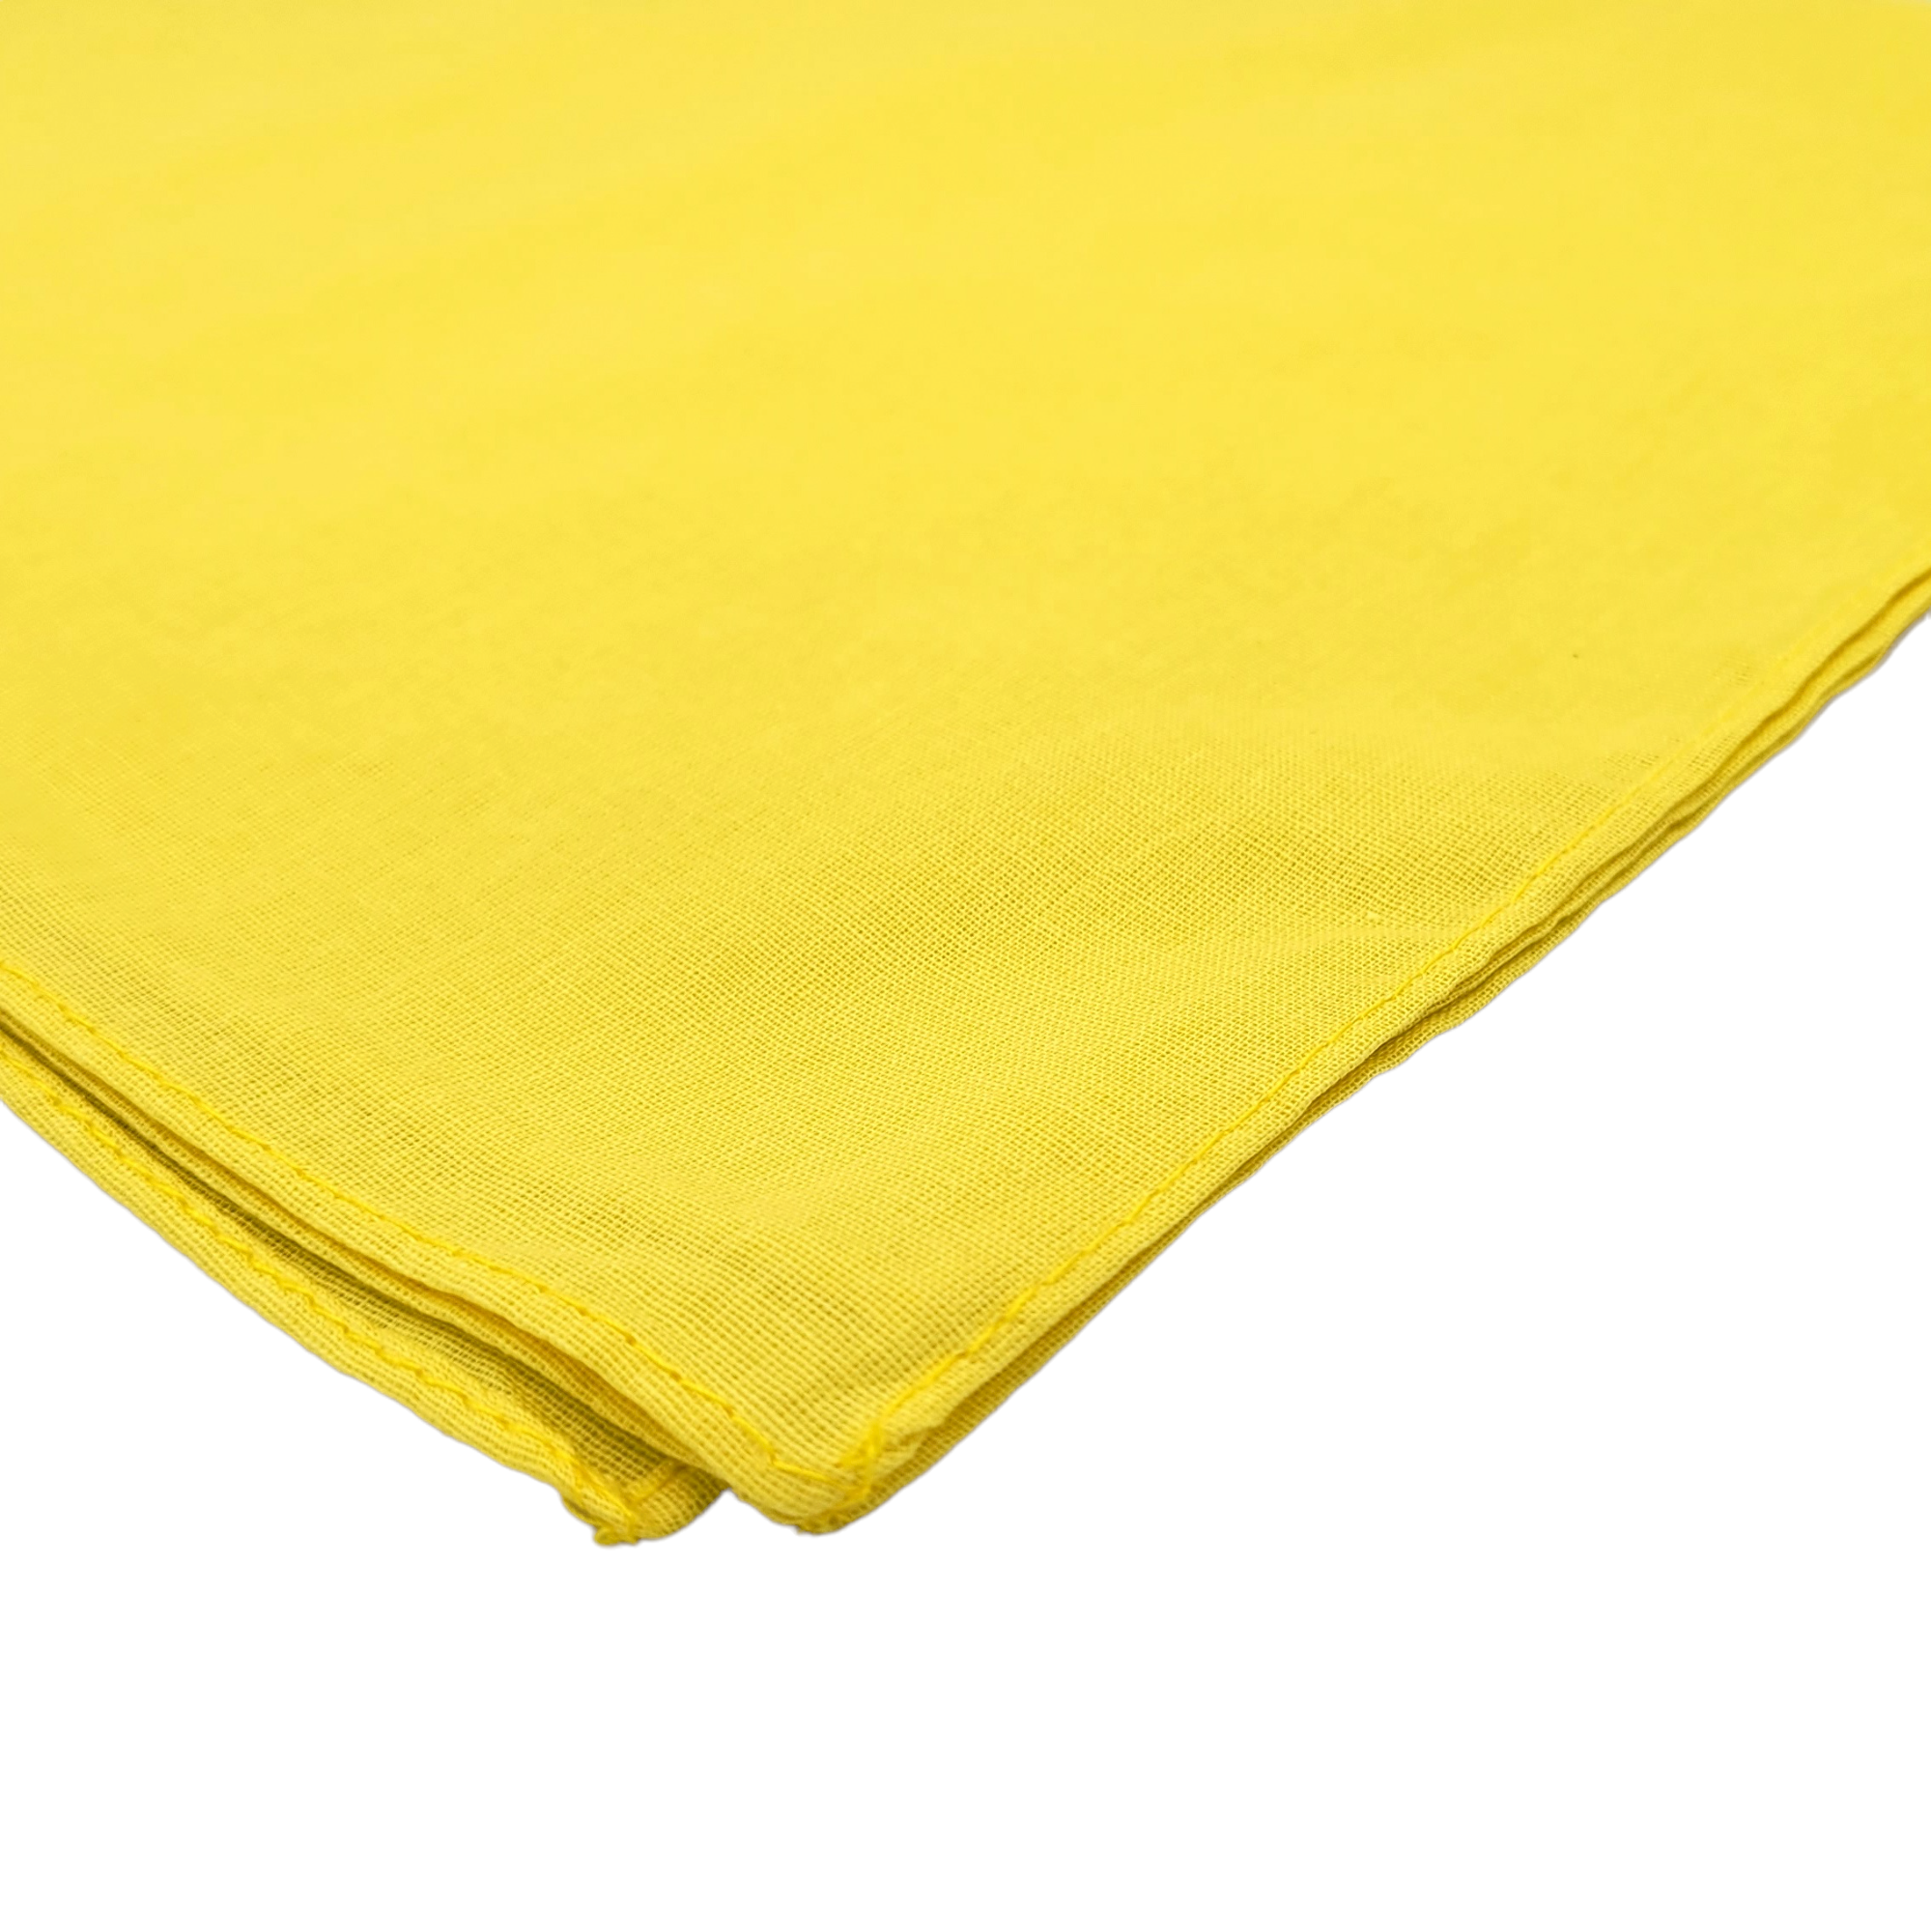 Yellow Cotton Altar Cloth - 22x22 inches